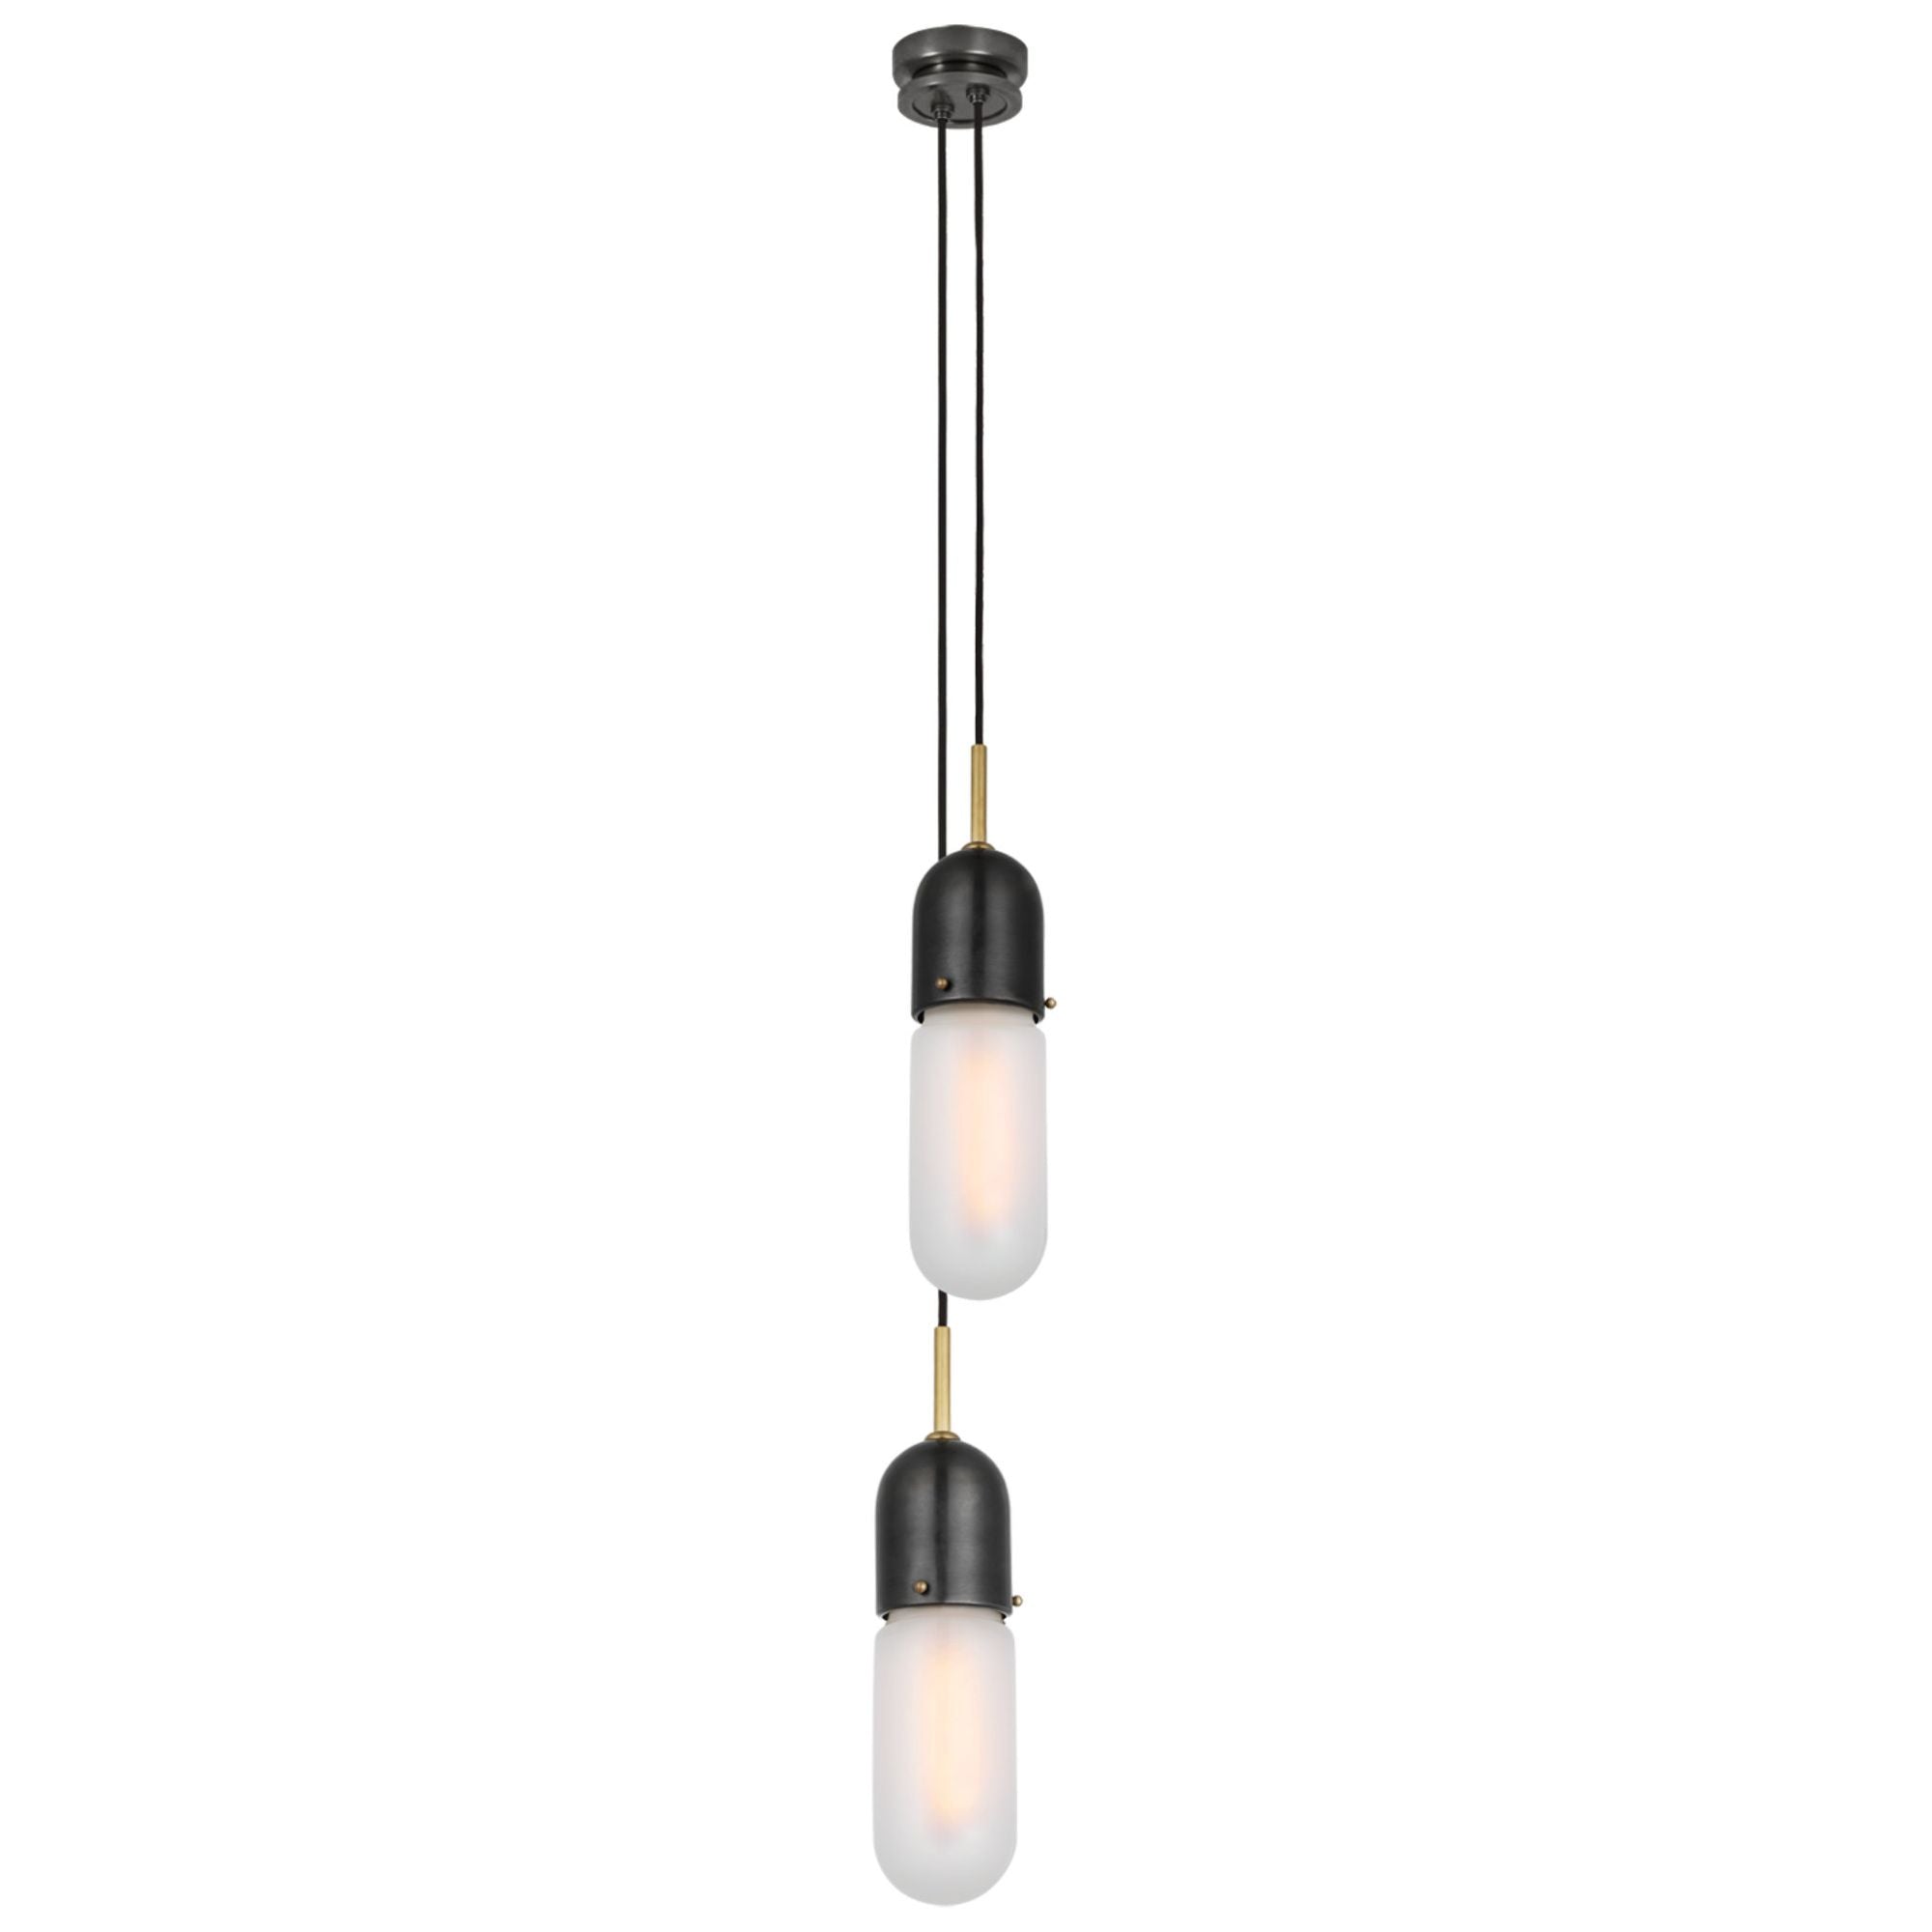 Thomas O'Brien Junio 2-Light Pendant in Bronze and Brass with Frosted Glass